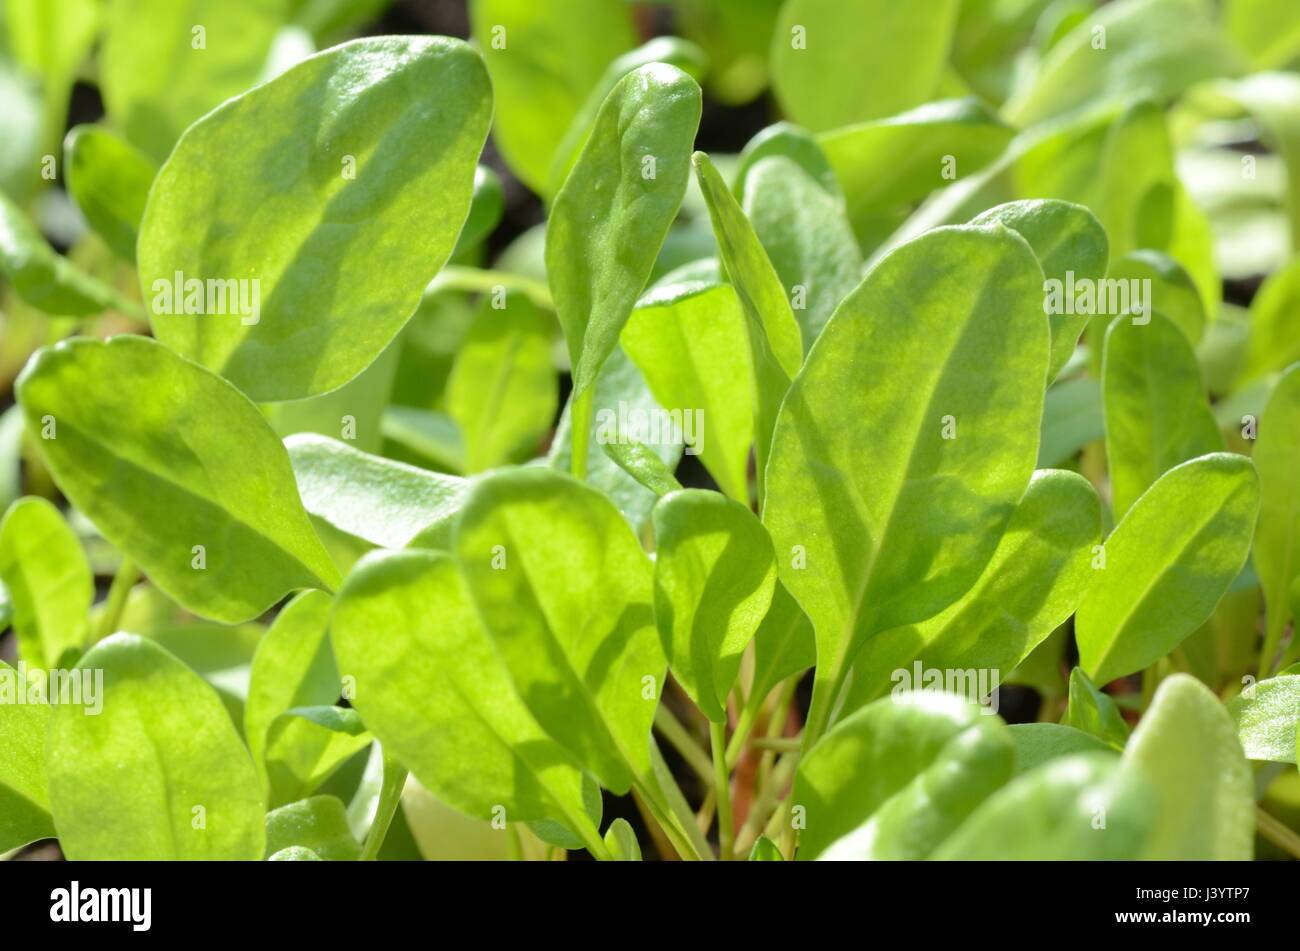 Spinach leaves growing in greenhouse Stock Photo